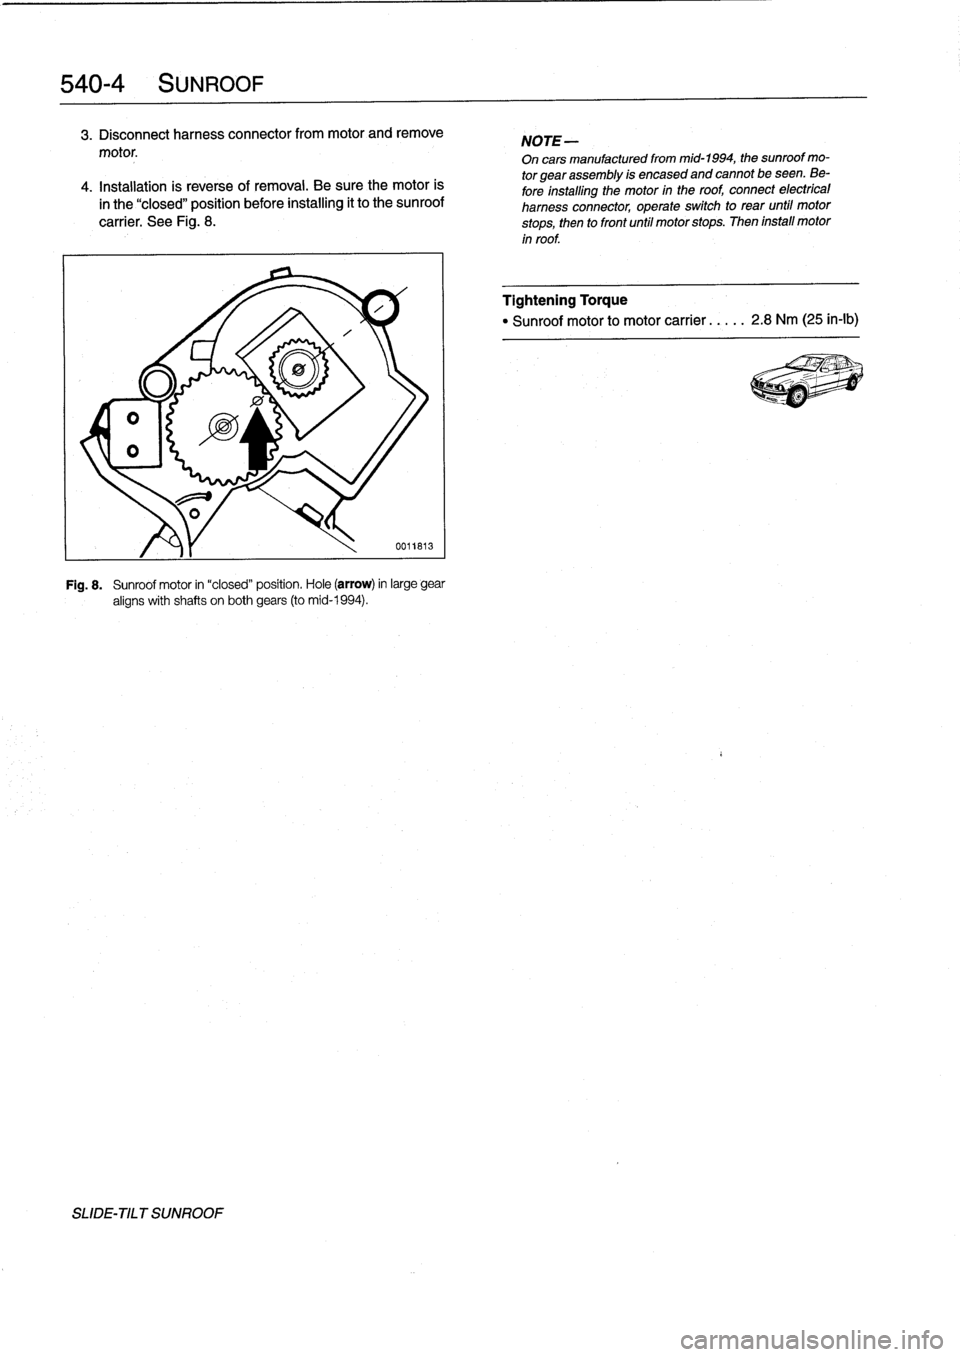 BMW M3 1996 E36 Workshop Manual 
540-
4
SUNROOF

3
.
Disconnect
harness
connector
from
motor
and
remove

motor
.

4
.
Installation
is
reverse
of
removal
.
Be
sure
the
motor
is
in
the
"closed"
position
before
installing
it
to
the
sun